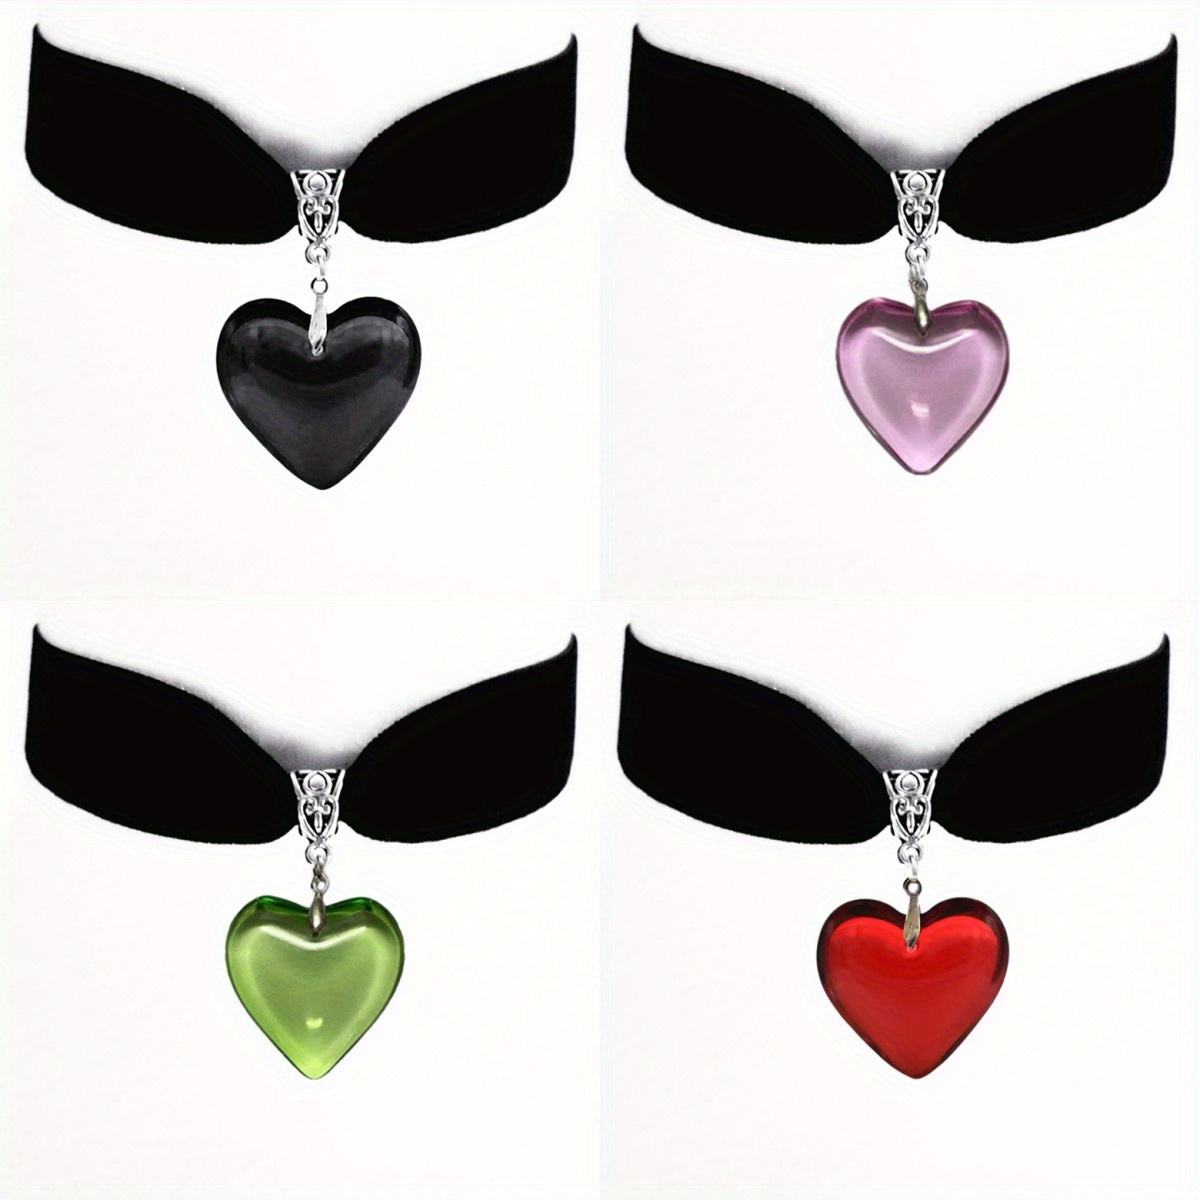 Black Choker Necklace with Crystal Heart Shaped Pendant Ribbon For Women